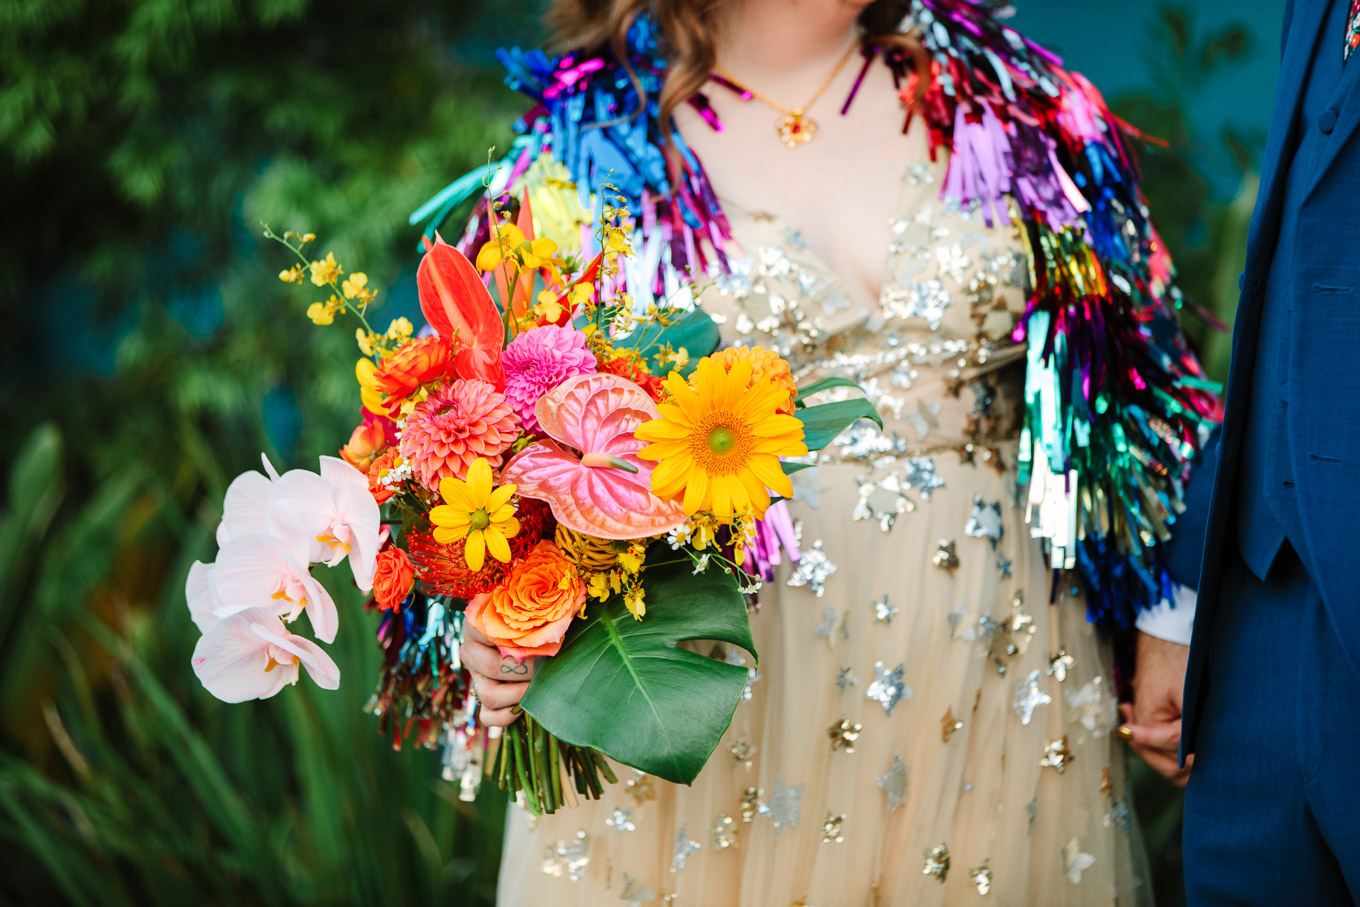 Colorful bridal bouquet | Colorful Downtown Los Angeles Valentine Wedding | Los Angeles wedding photographer | #losangeleswedding #colorfulwedding #DTLA #valentinedtla   Source: Mary Costa Photography | Los Angeles